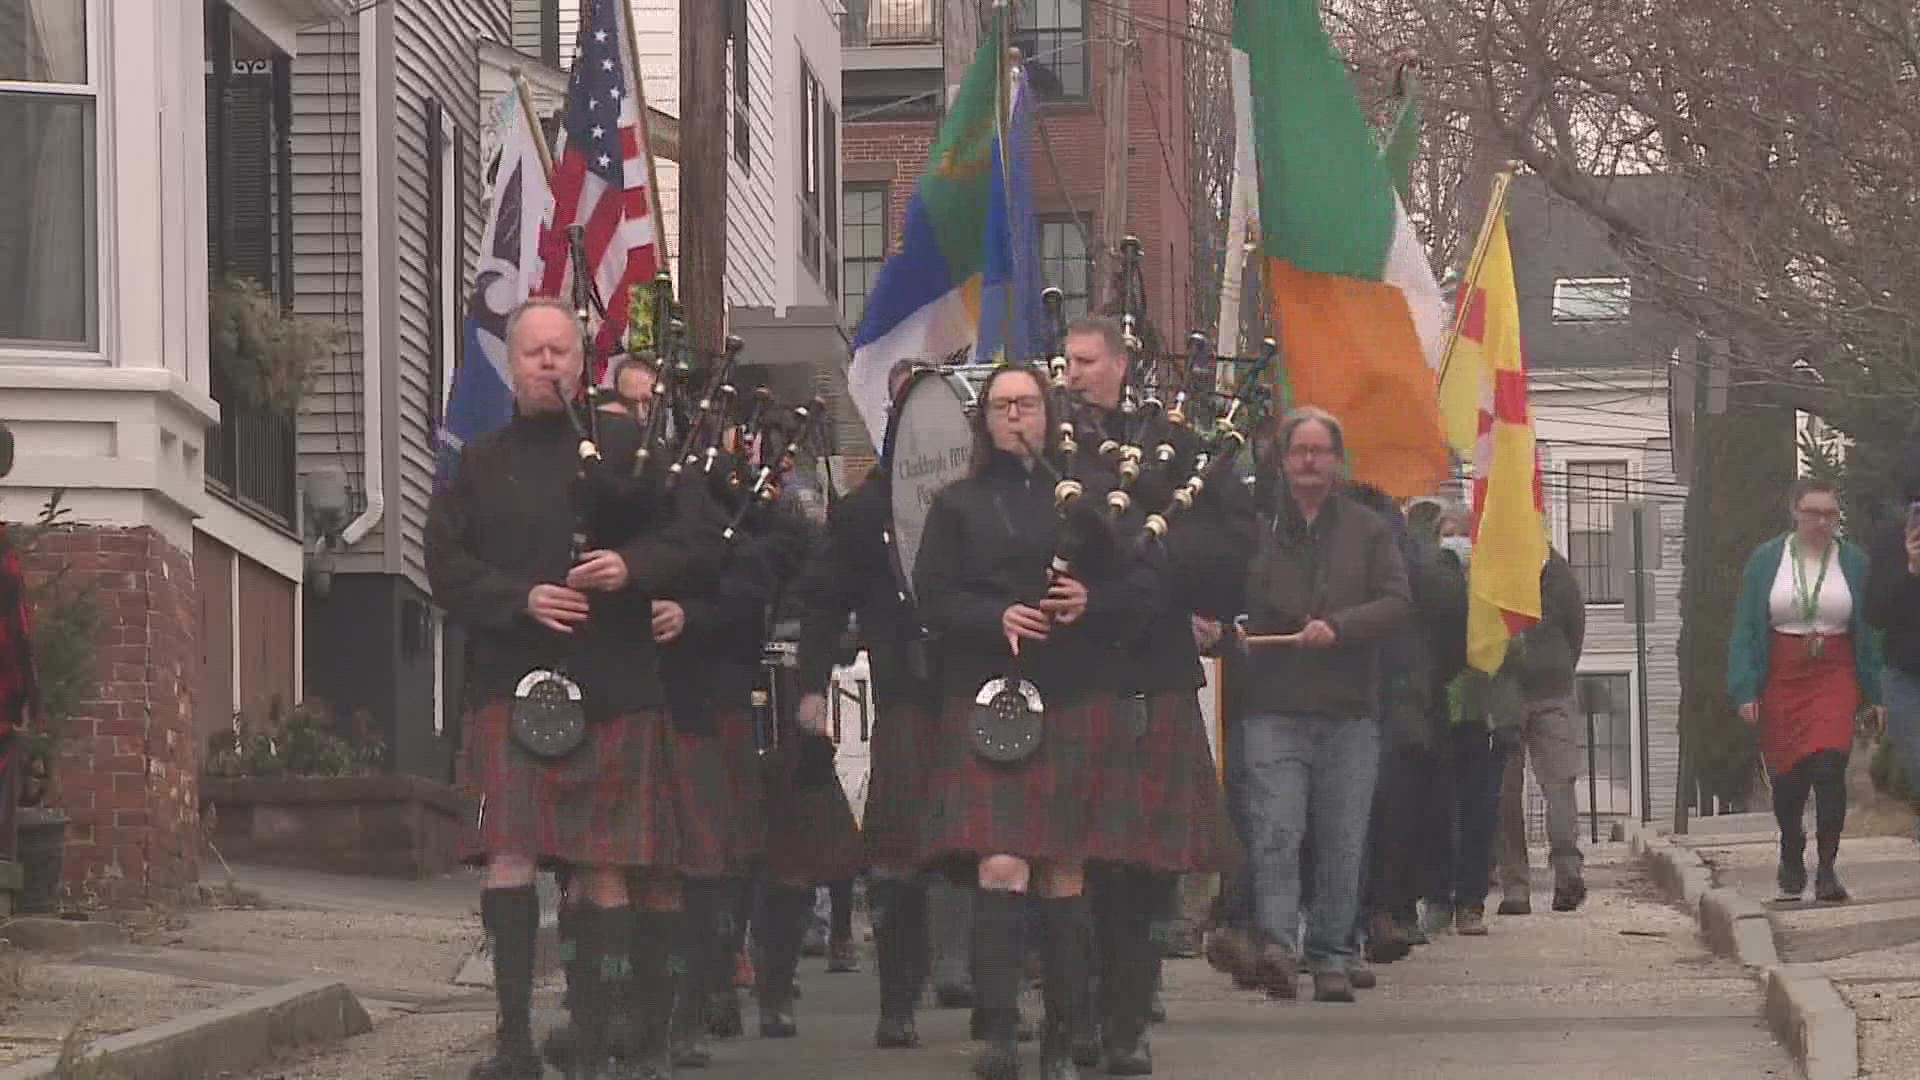 The Maine Irish Heritage Center kicked off their St. Patrick's Day parade at 8 a.m. Thursday.